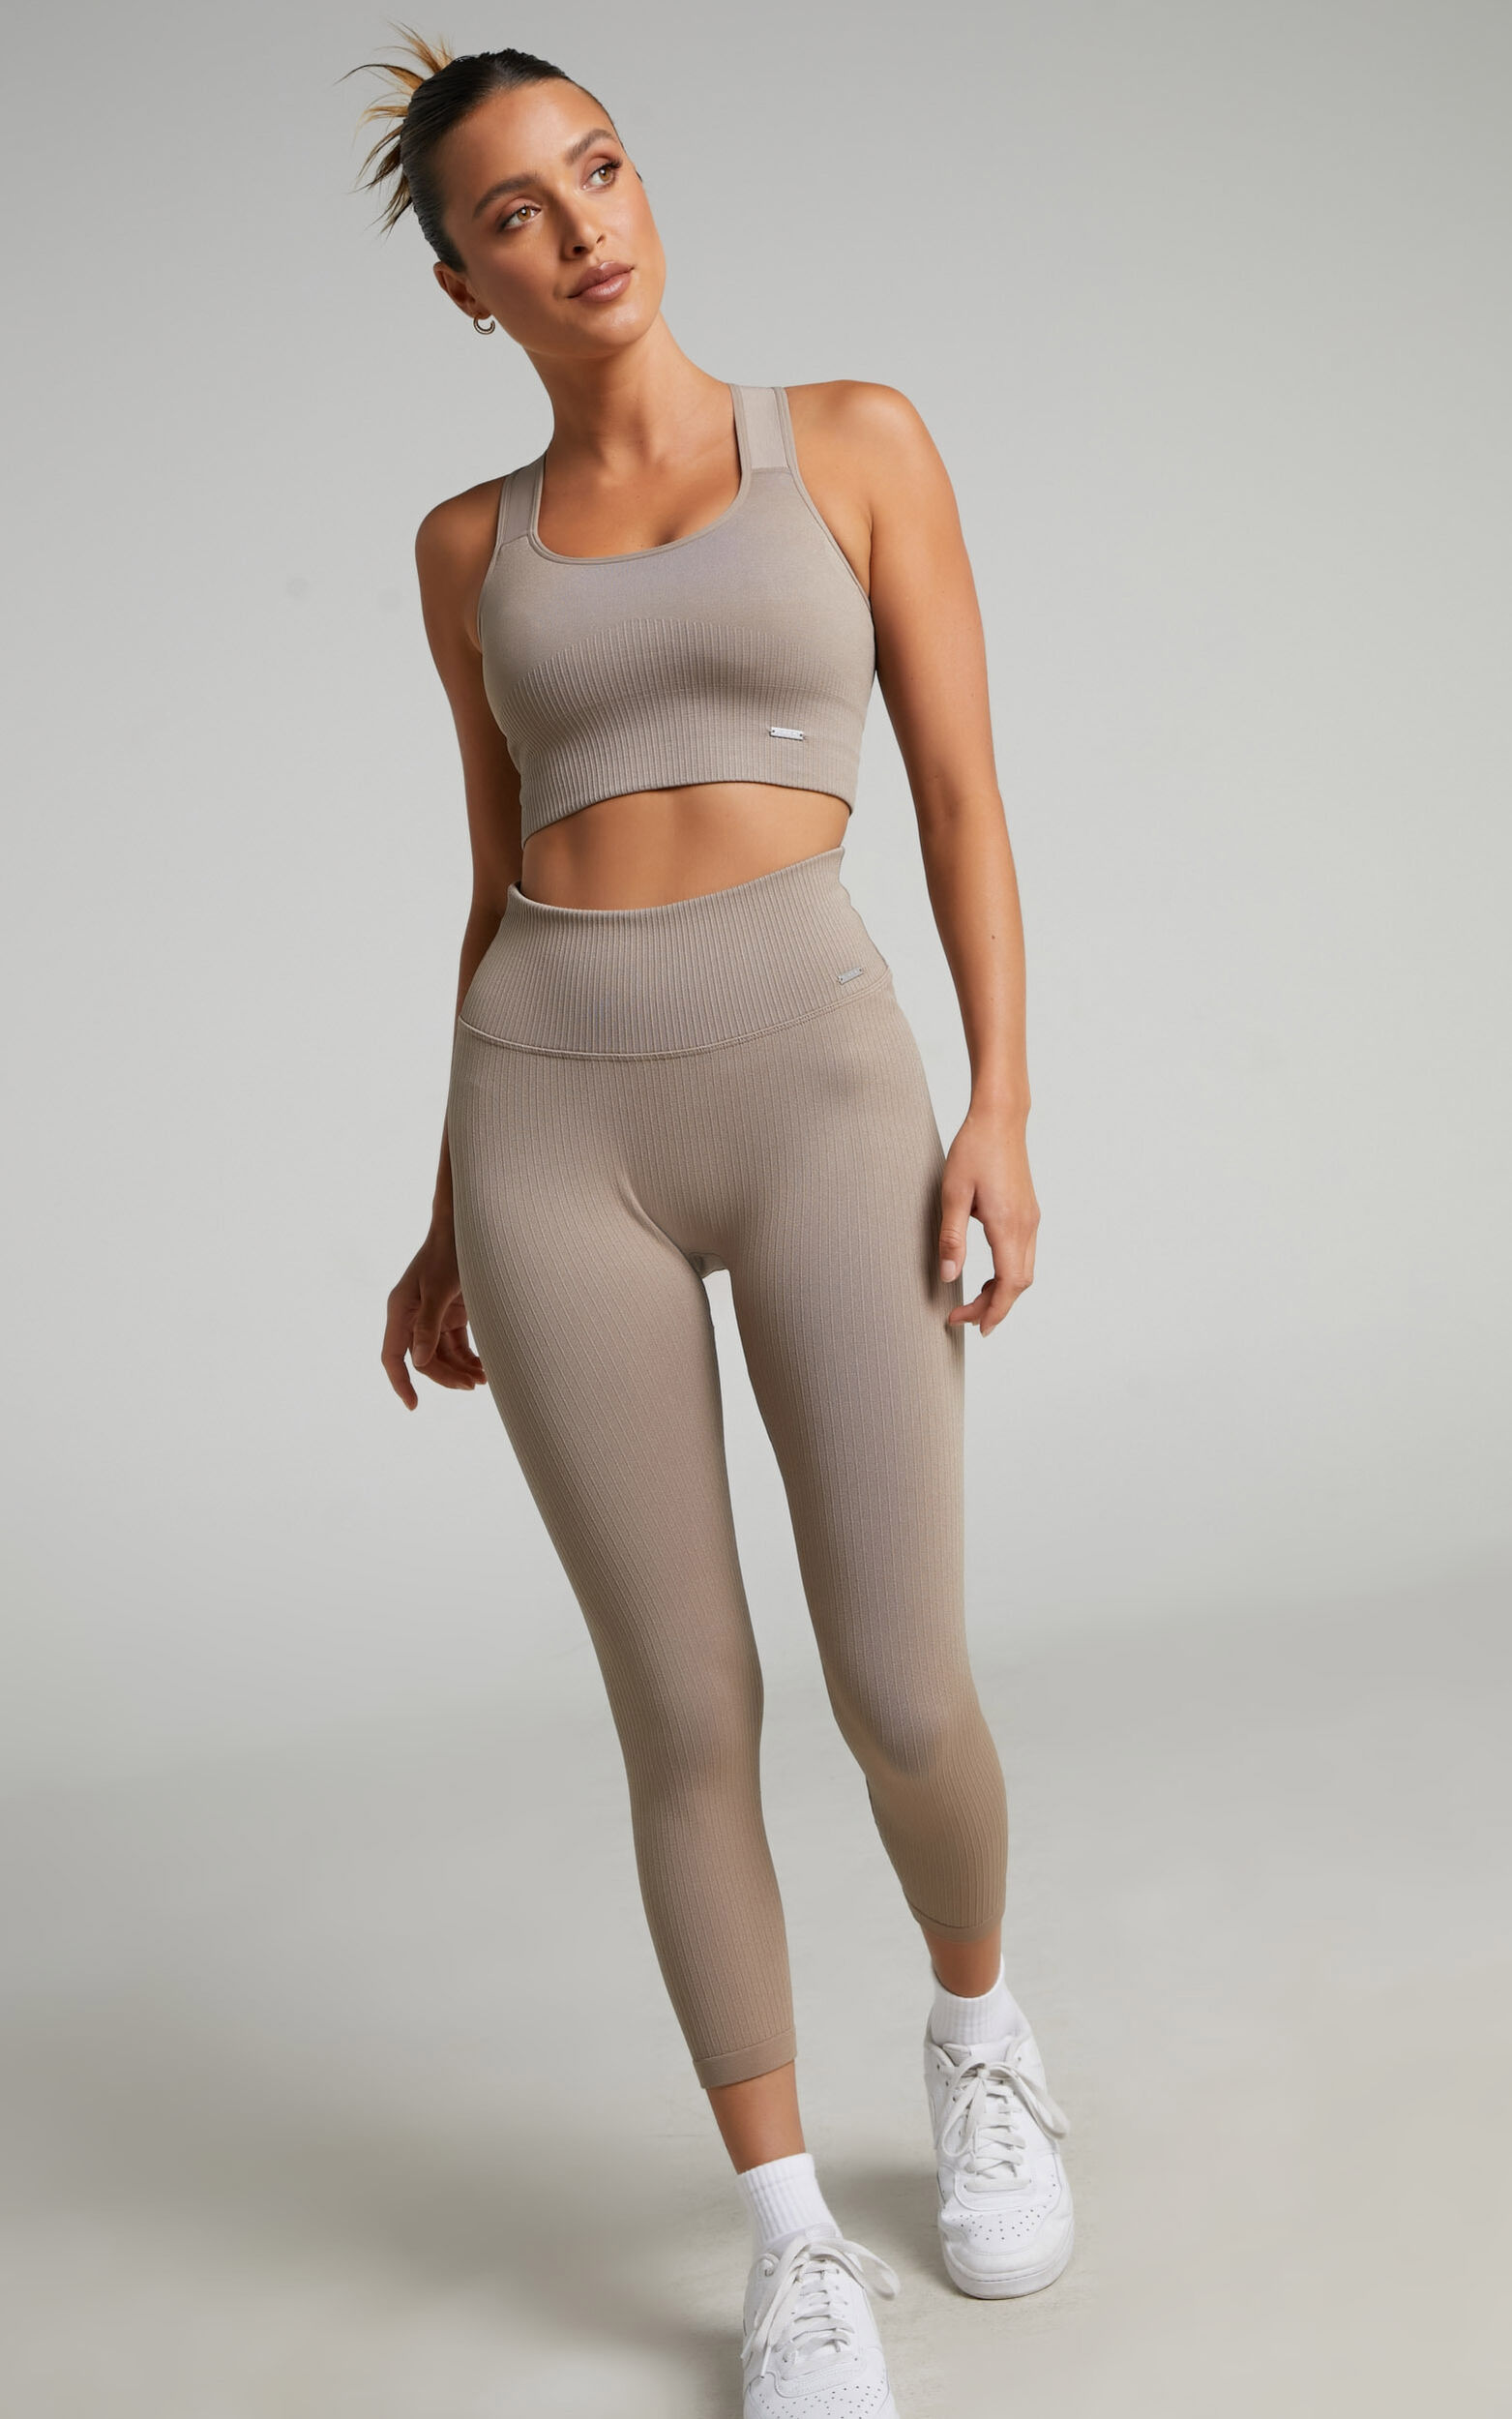 Aim'n - RIBBED SEAMLESS TIGHTS 7/8 in Espresso